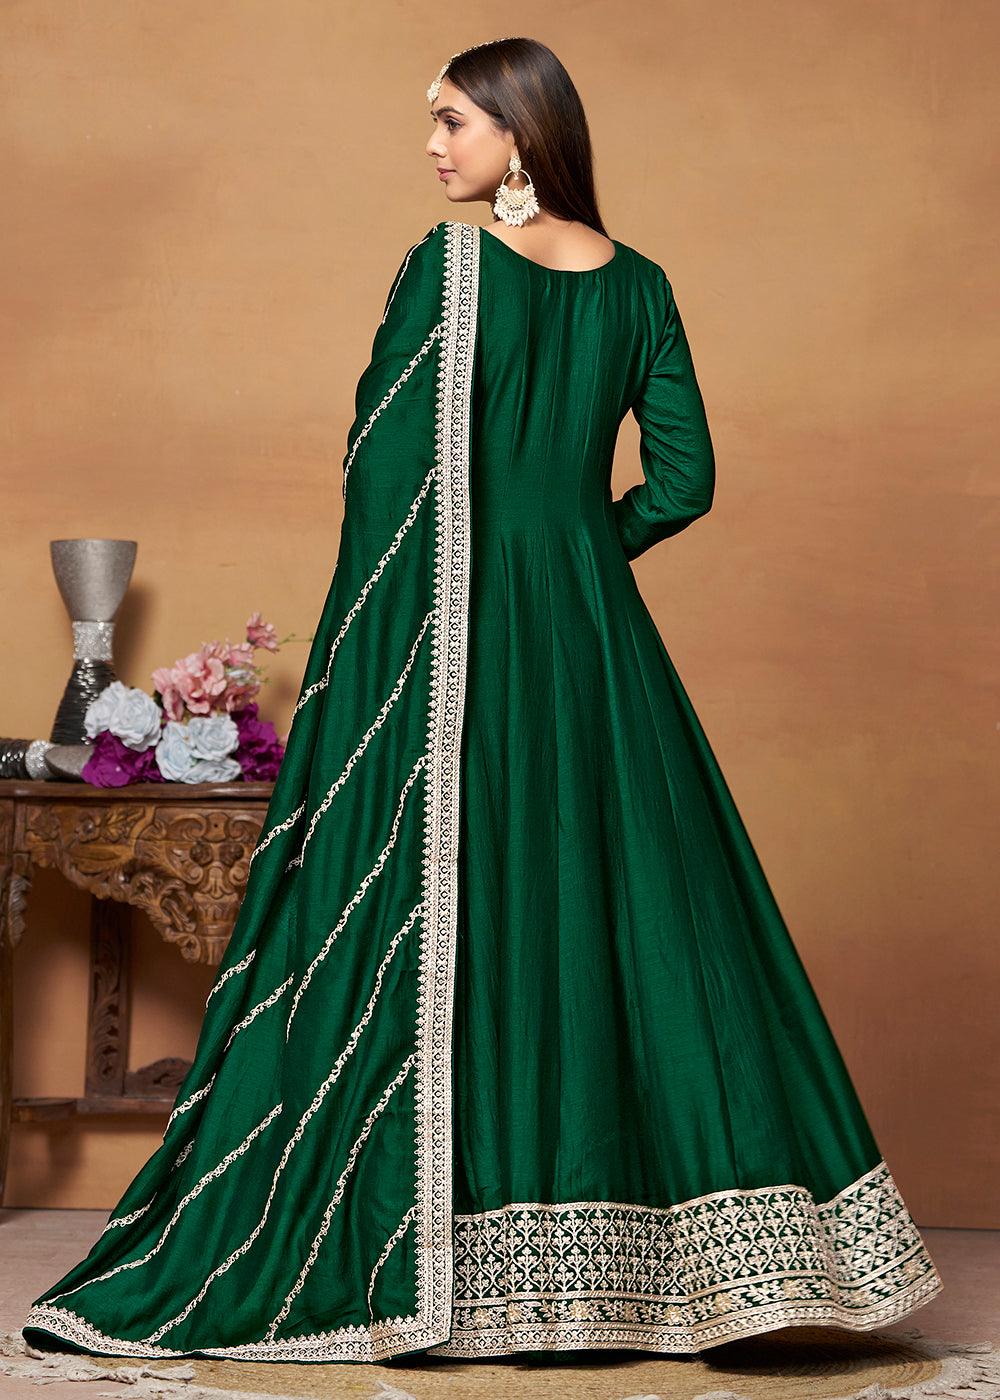 Buy Now Amazing Art Silk Green Embroidered Festive Anarkali Suit Online in USA, UK, Australia, New Zealand, Canada & Worldwide at Empress Clothing.